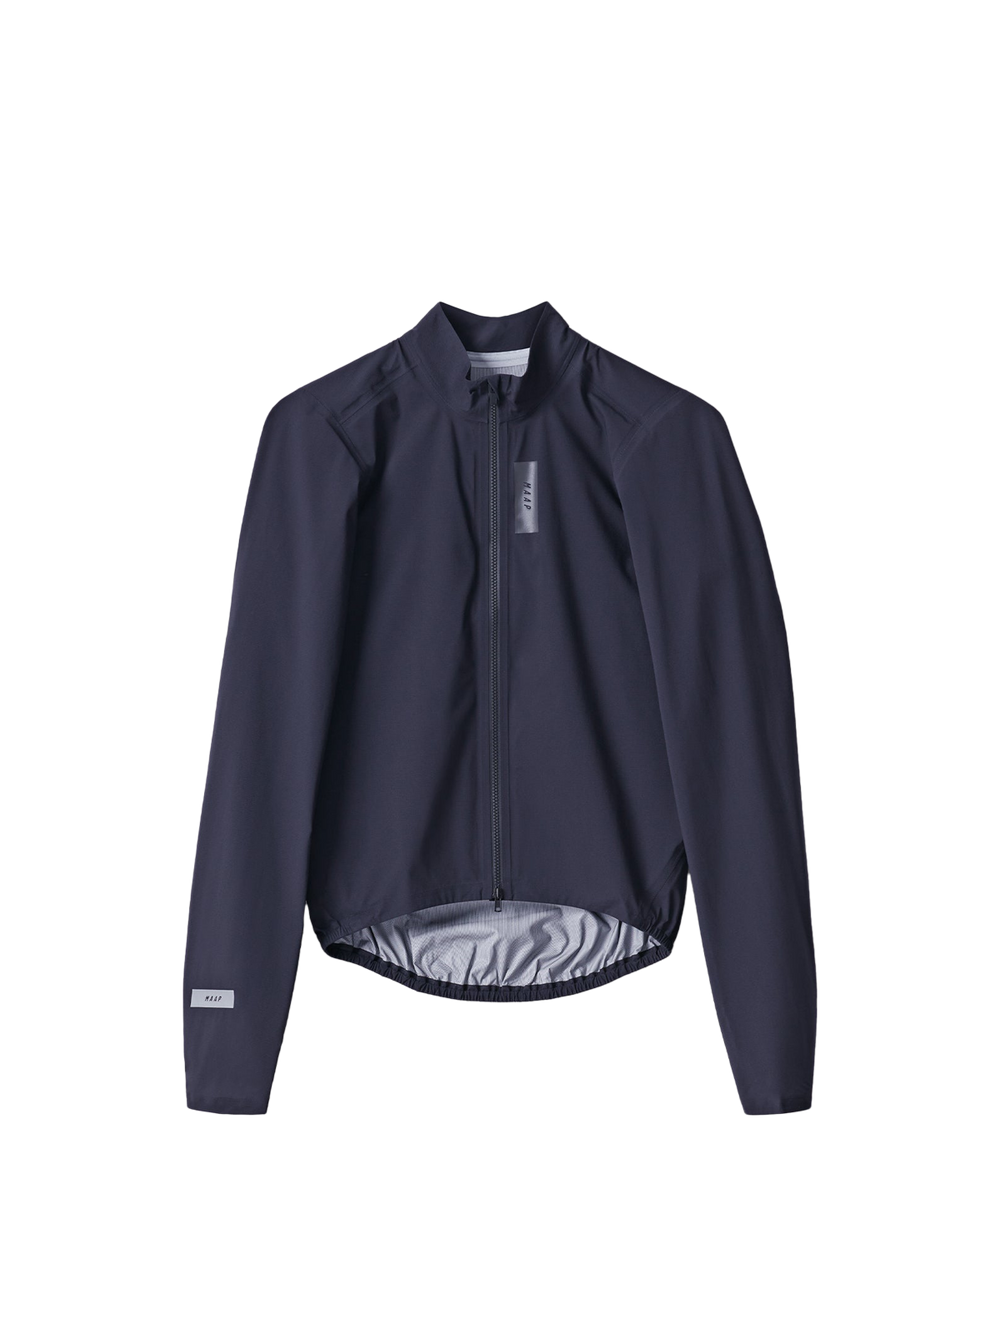 Product Image for Atmos Jacket